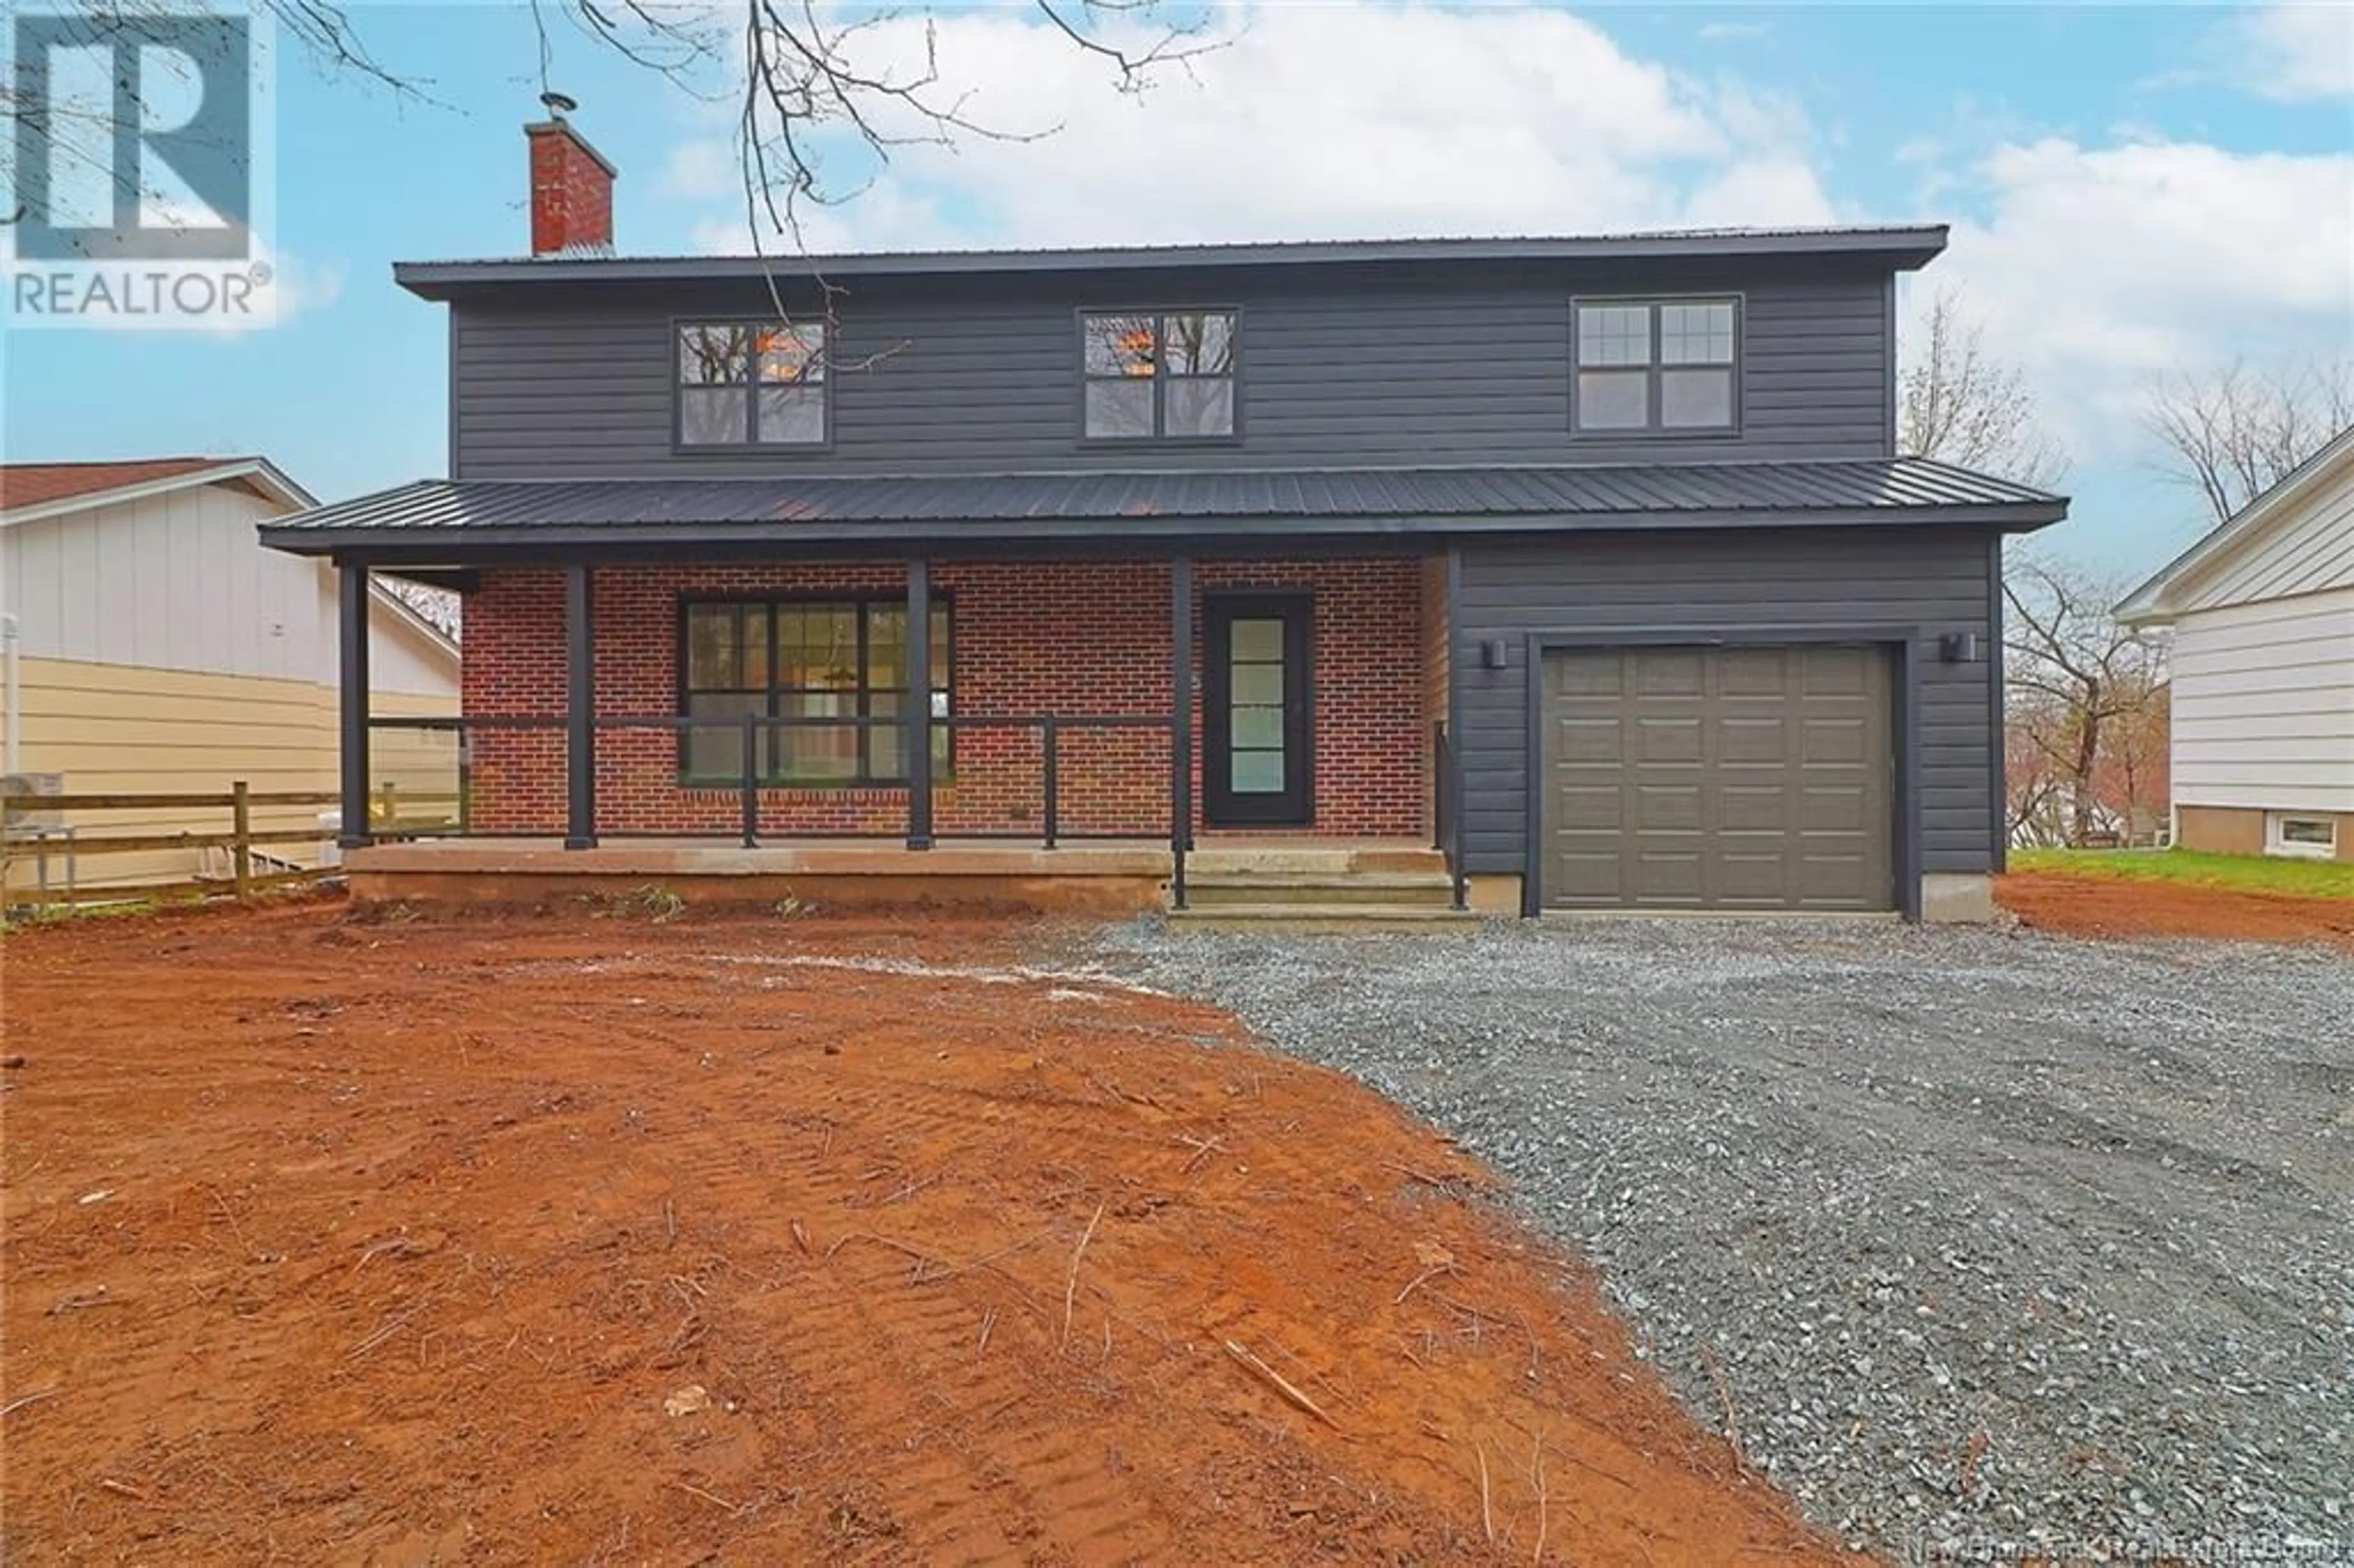 Home with brick exterior material for 435 Mansfield Street, Fredericton New Brunswick E3A3A1